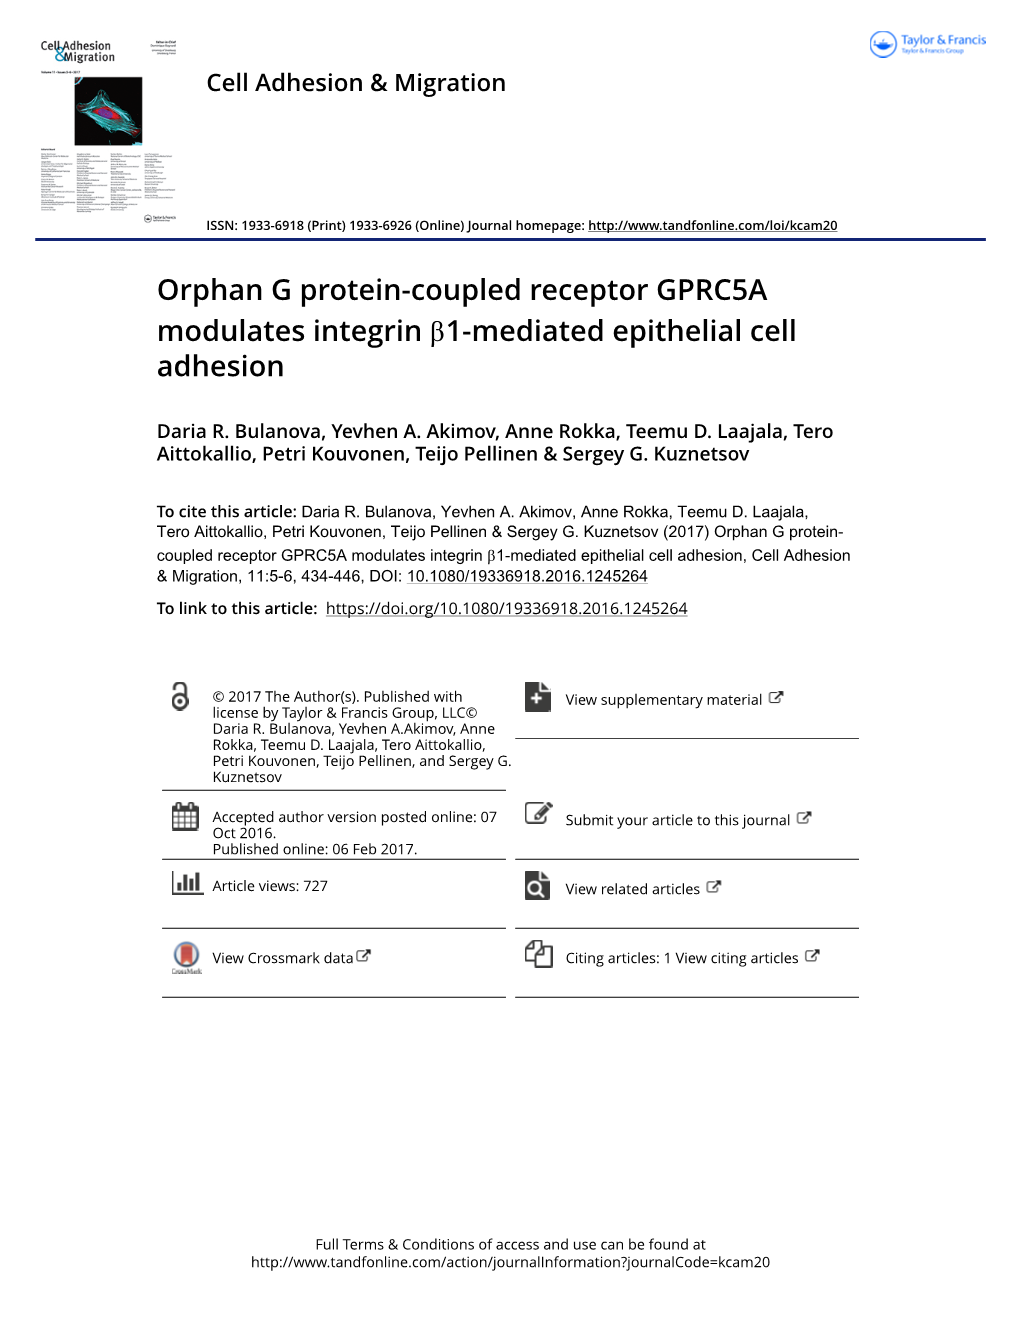 Orphan G Protein-Coupled Receptor GPRC5A Modulates Integrin Β1-Mediated Epithelial Cell Adhesion